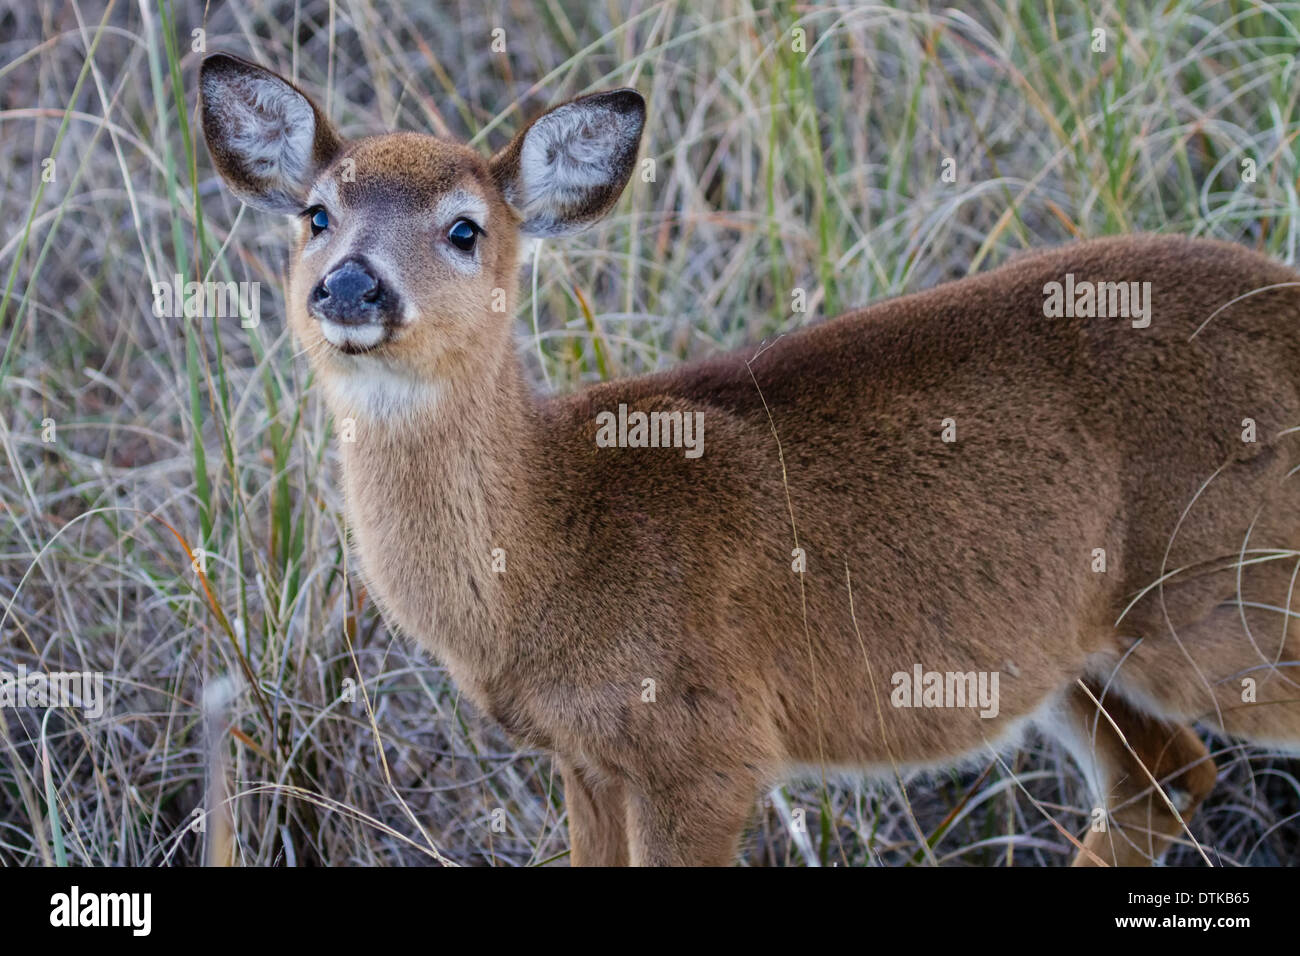 Yearling White-tailed Deer (Odocoileus virginianus) standing in tall grass. Stock Photo